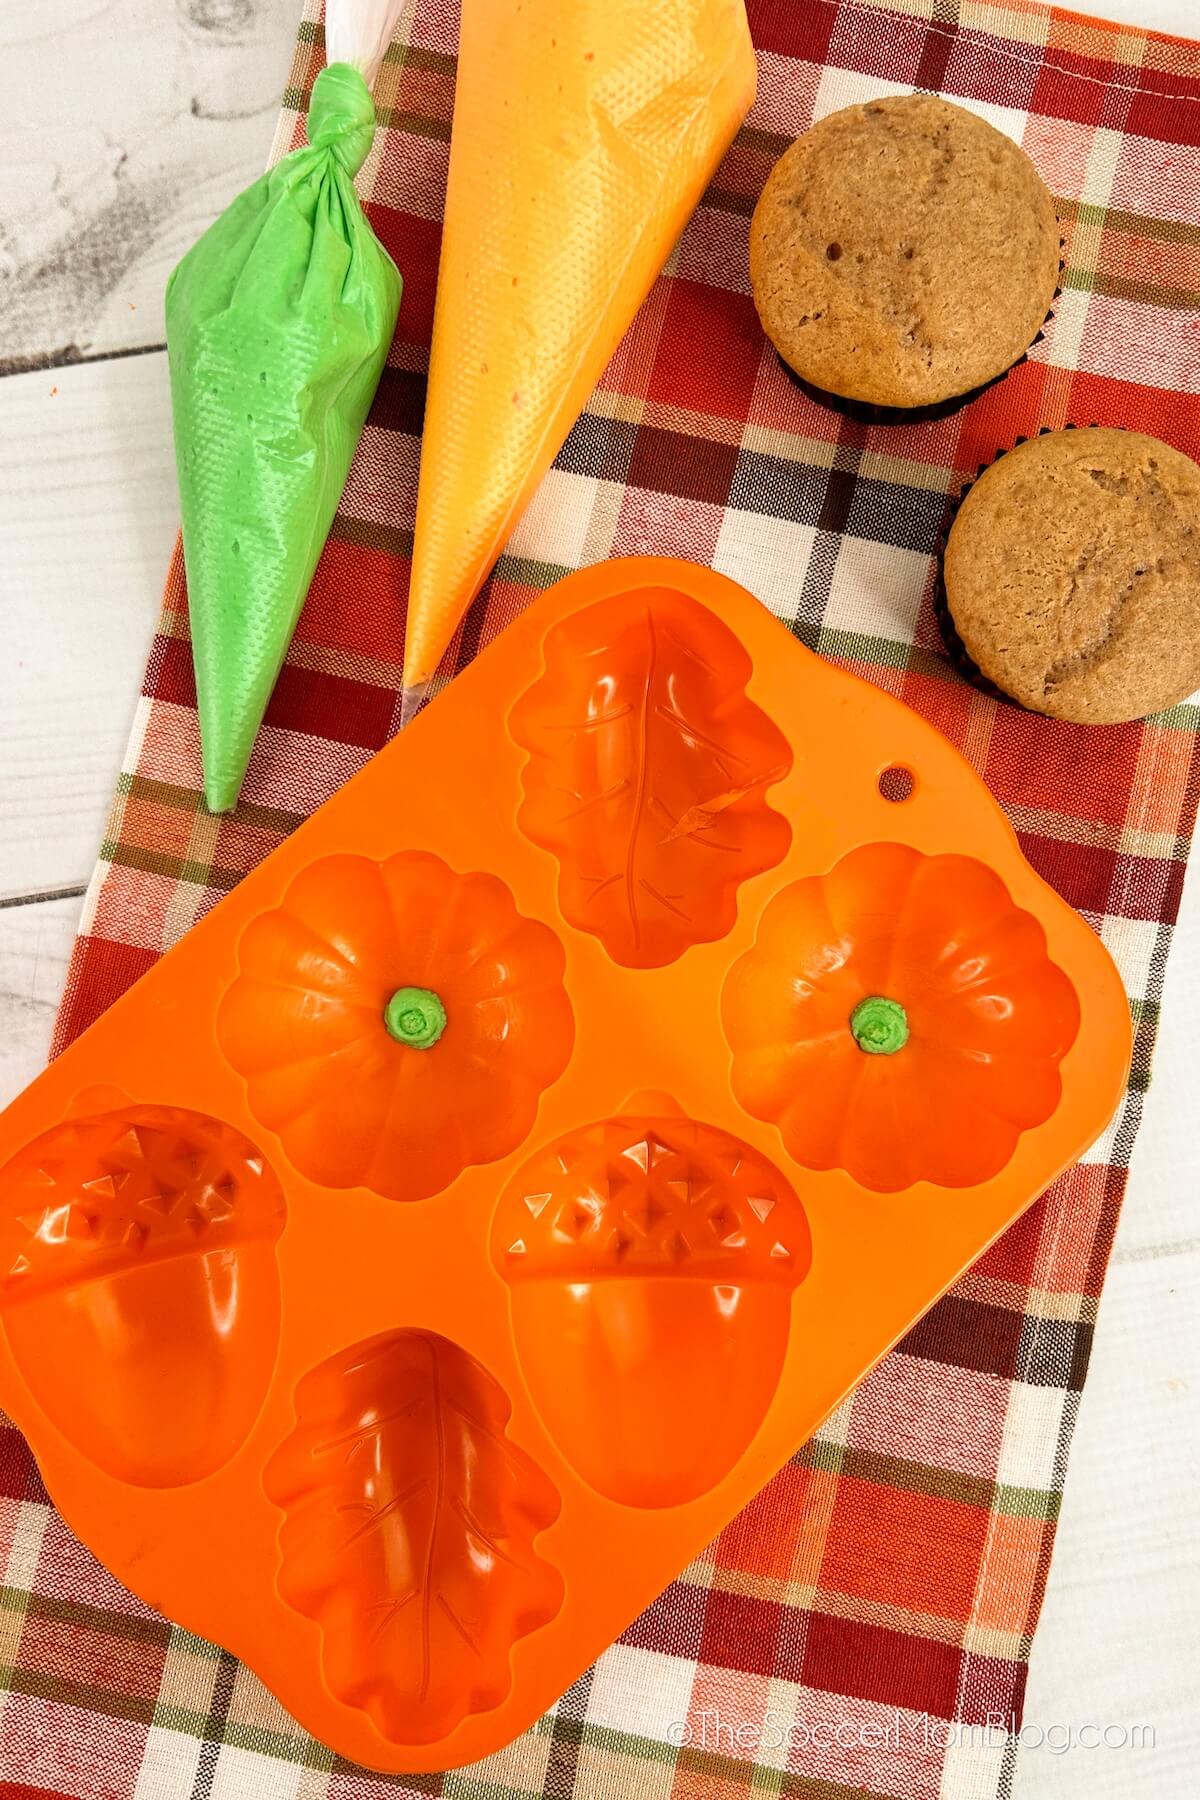 supplies to make pumpkin shaped cupcakes: orange and green frosting, pumpkin molds, and pumpkin cupcakes.